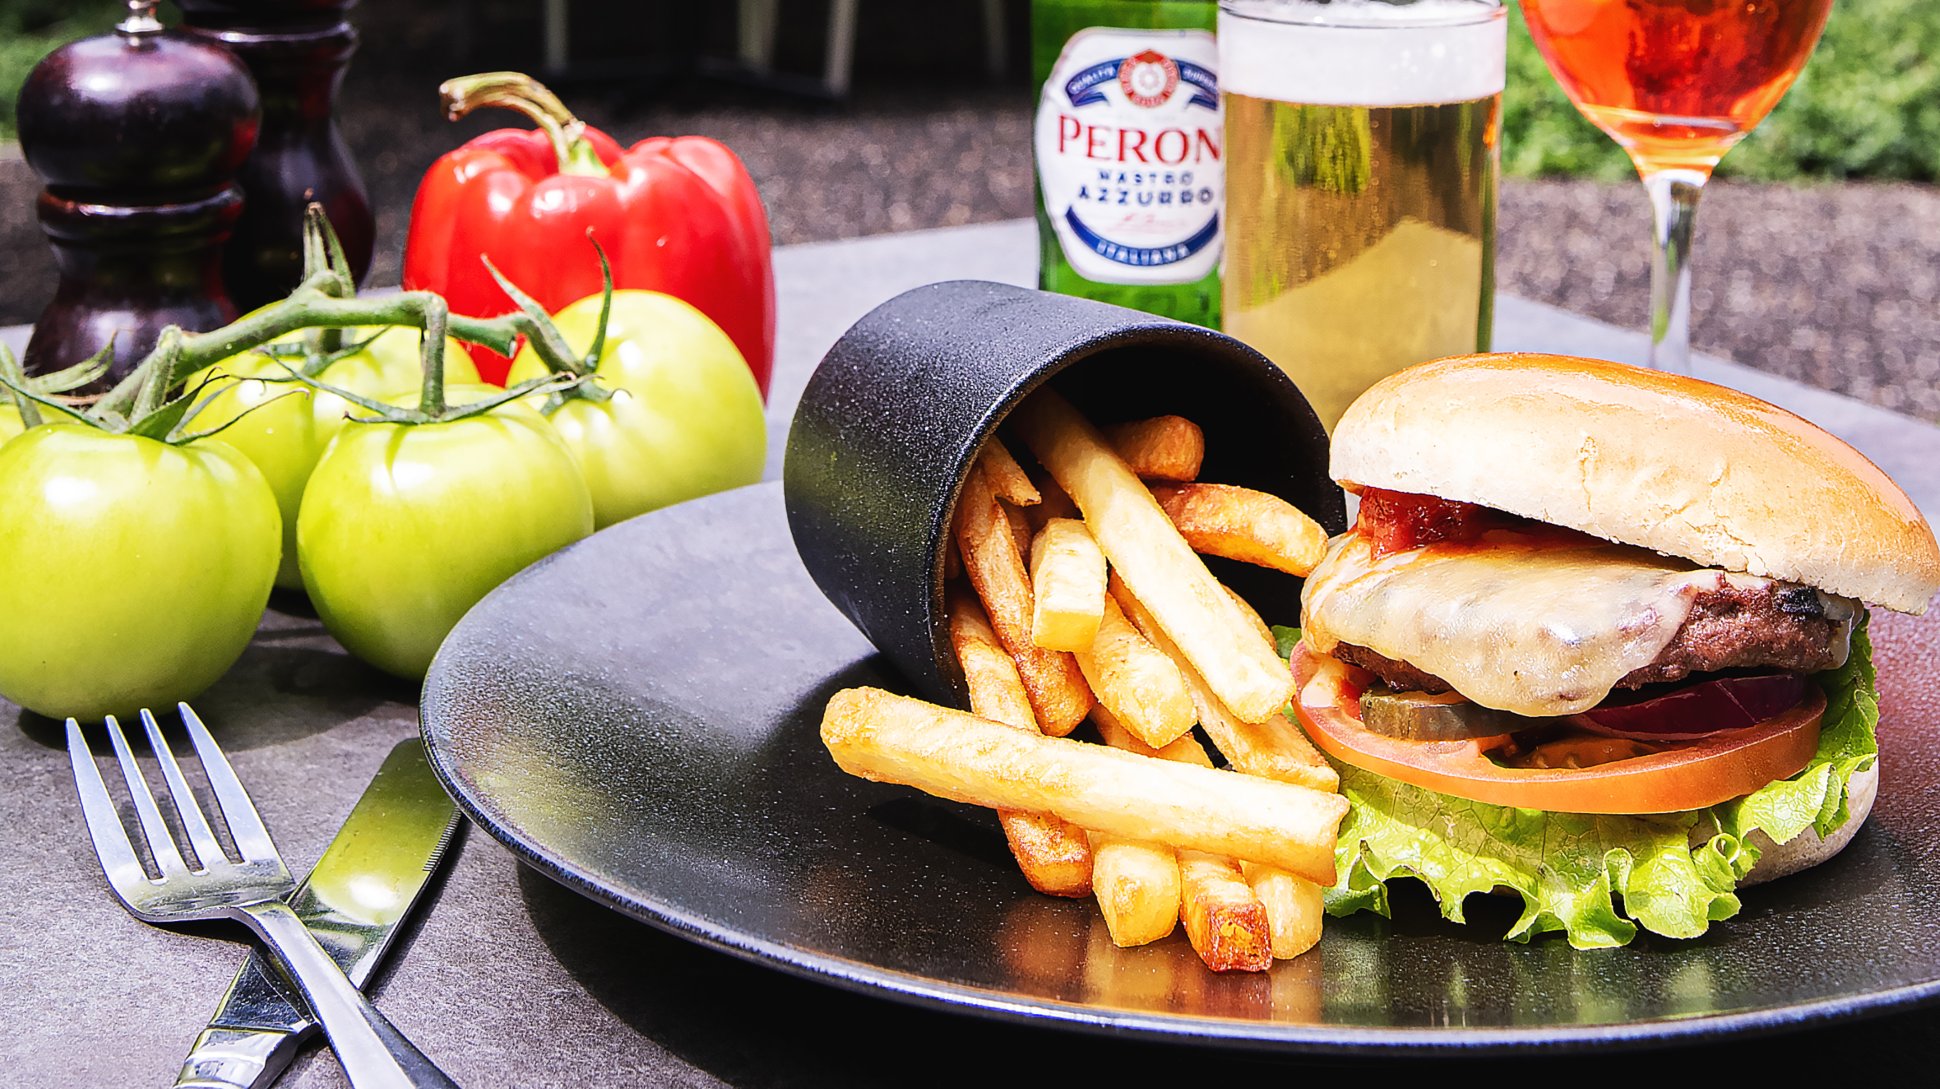 A burger and chips on a plate with large tomatoes in the background